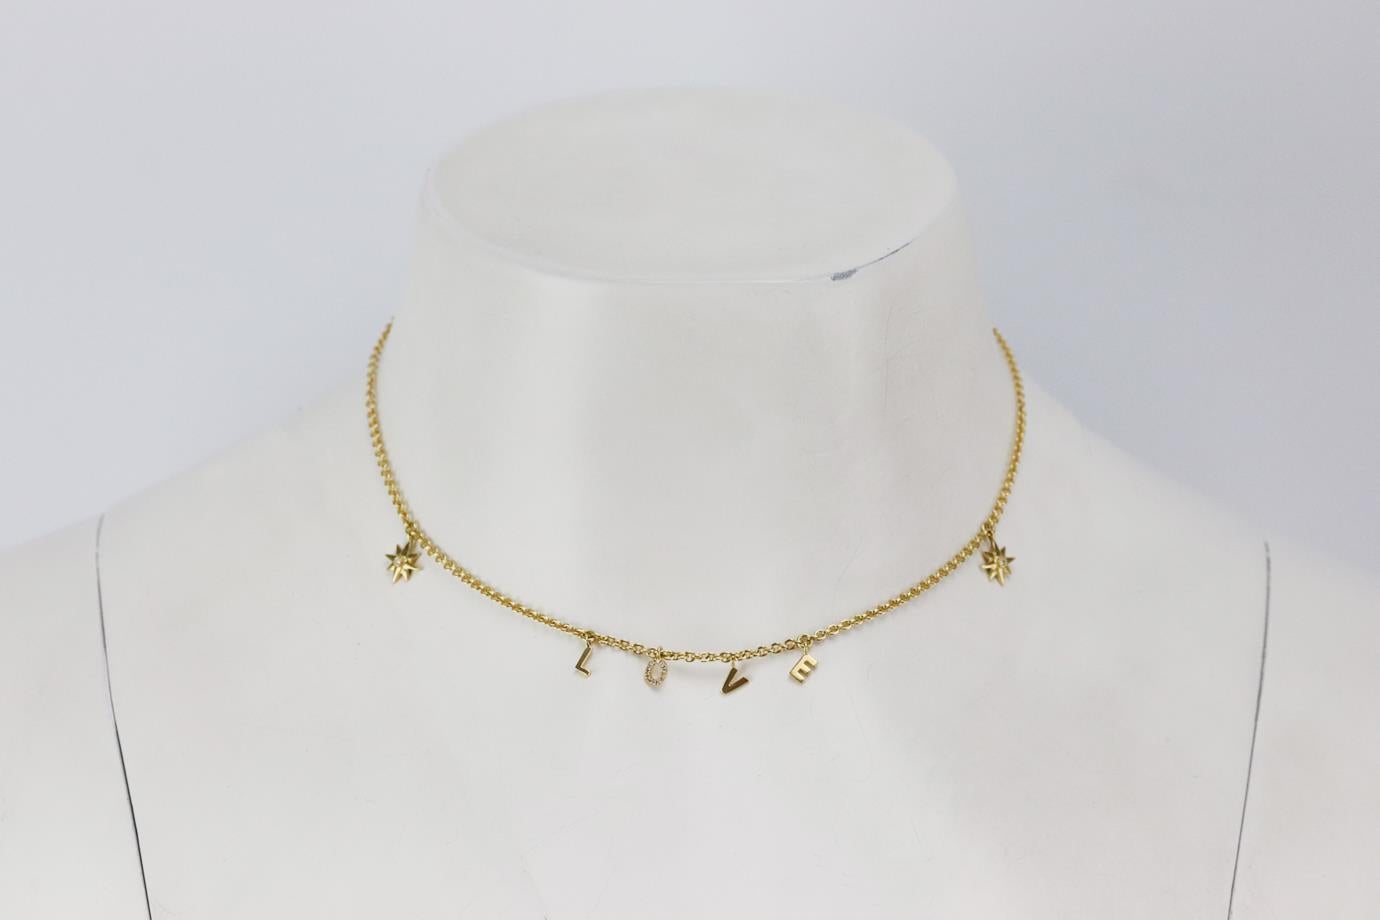 SHAY Love 18k yellow gold and diamond chain necklace. Made from 18k yellow gold with 12 pave-diamonds and set on a small chain. Yellow-gold. Lobster clasp fastening at back. Does not come with box or dustbag. Min. Chain Length: 13 in. Max. Chain